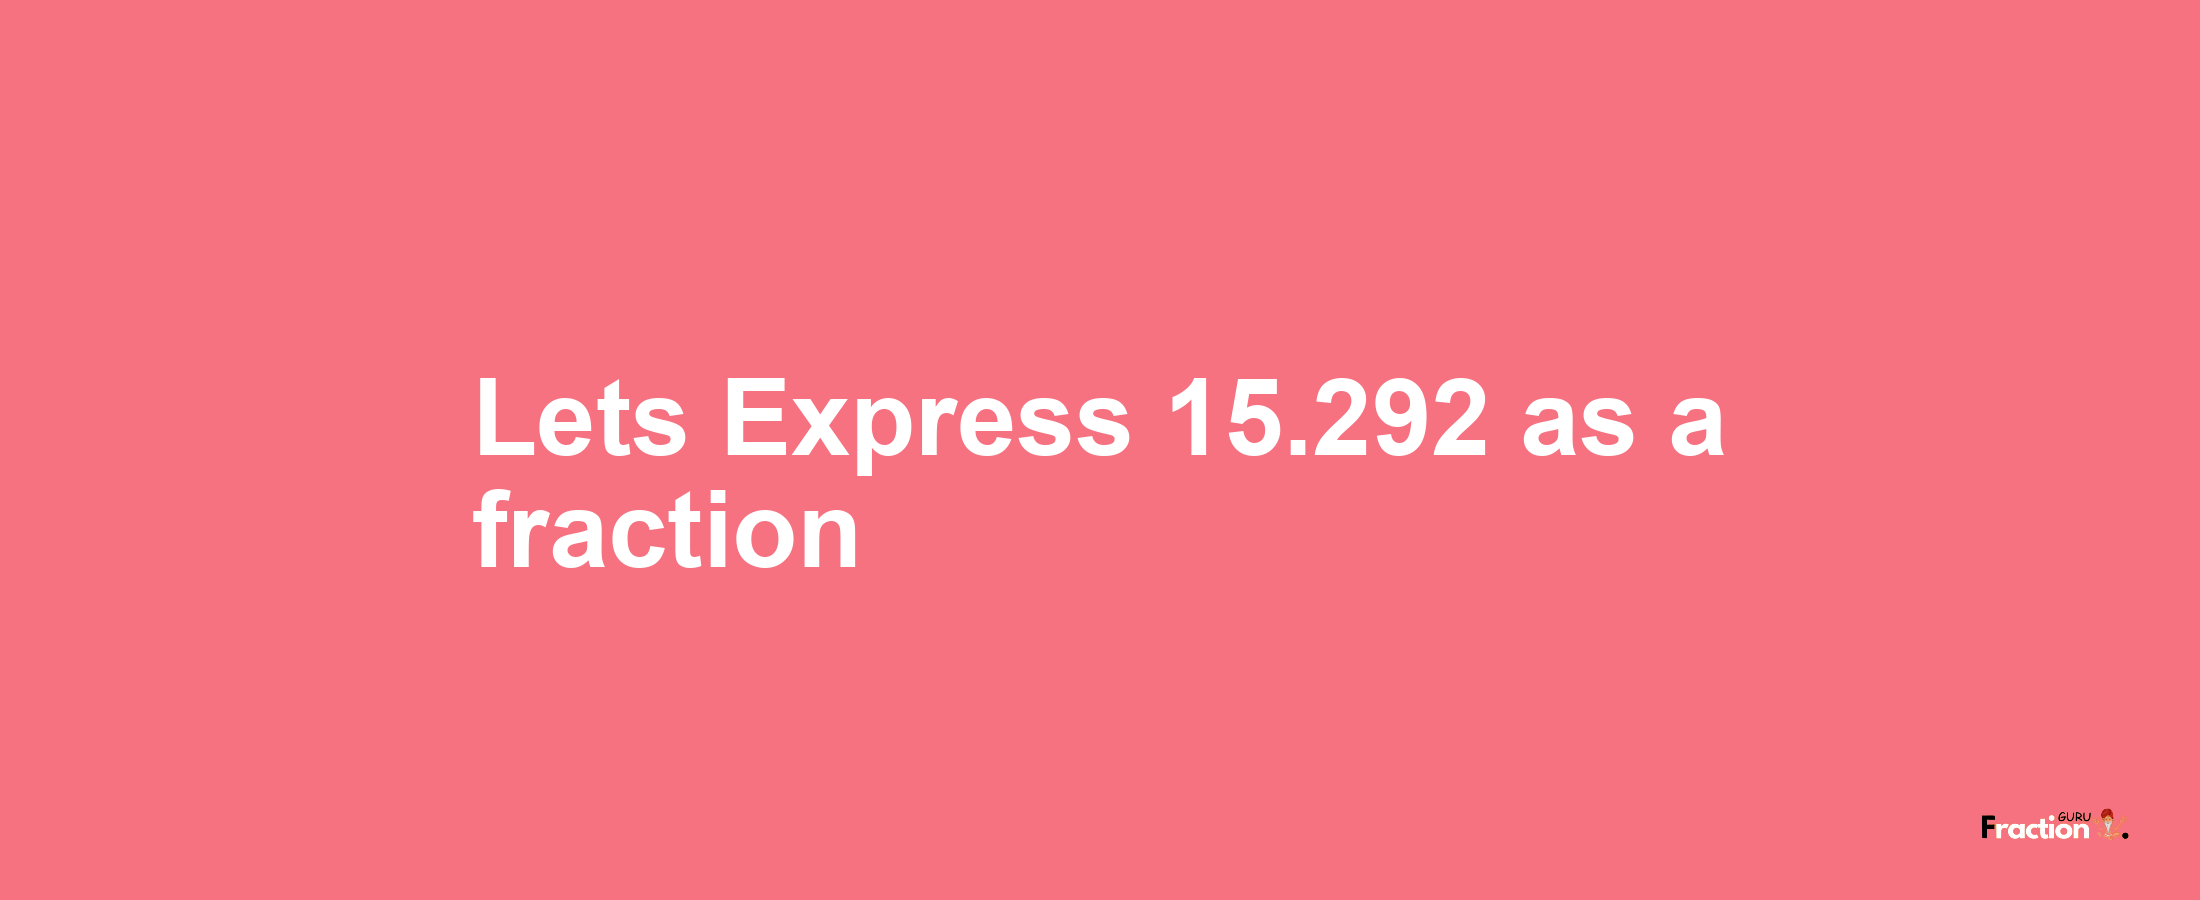 Lets Express 15.292 as afraction